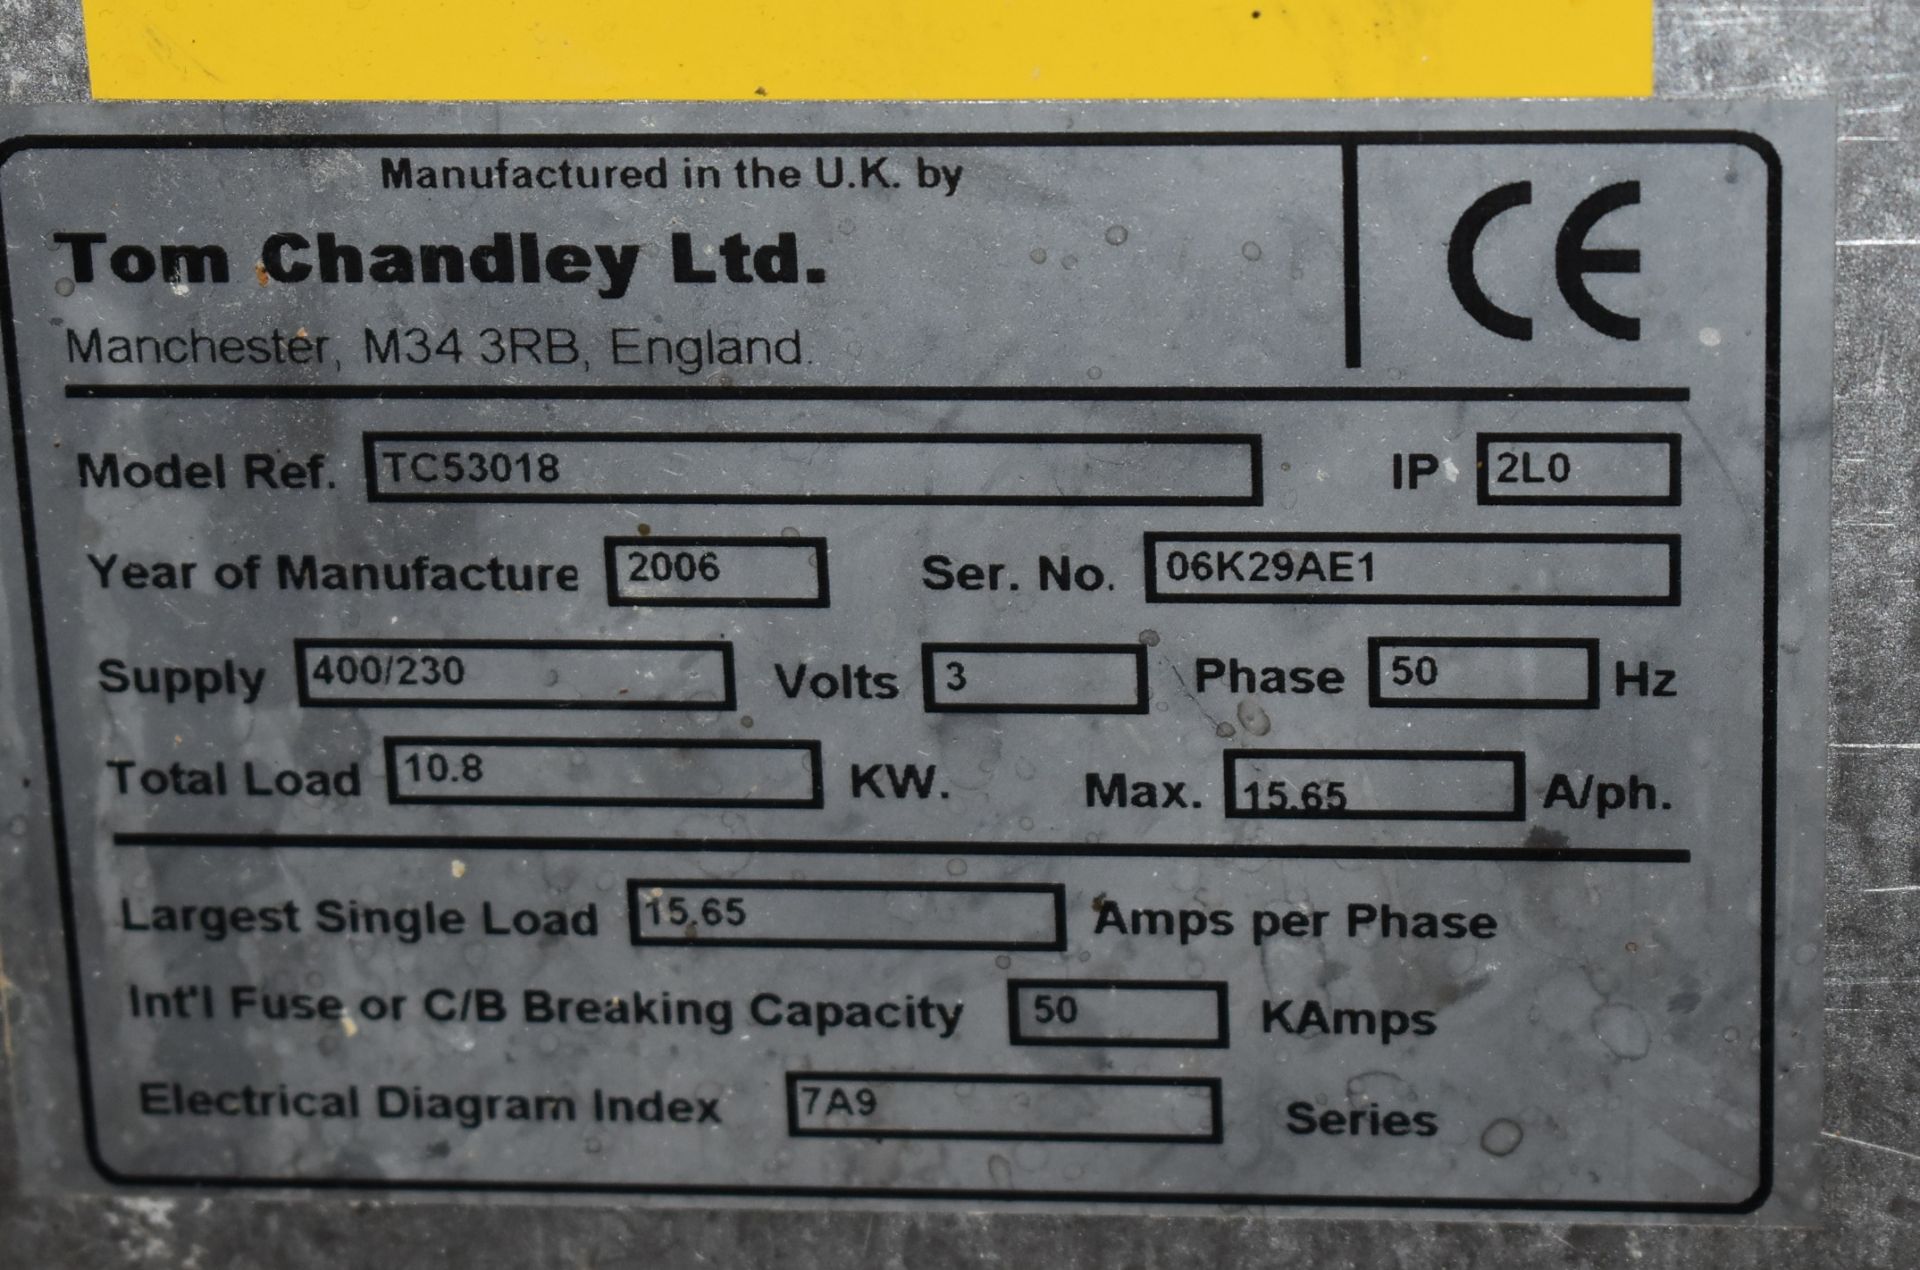 1 x Tom Chandley Double Door Bakey Oven - 3 Phase - Model TC53018 - Removed From Well Known - Image 4 of 8